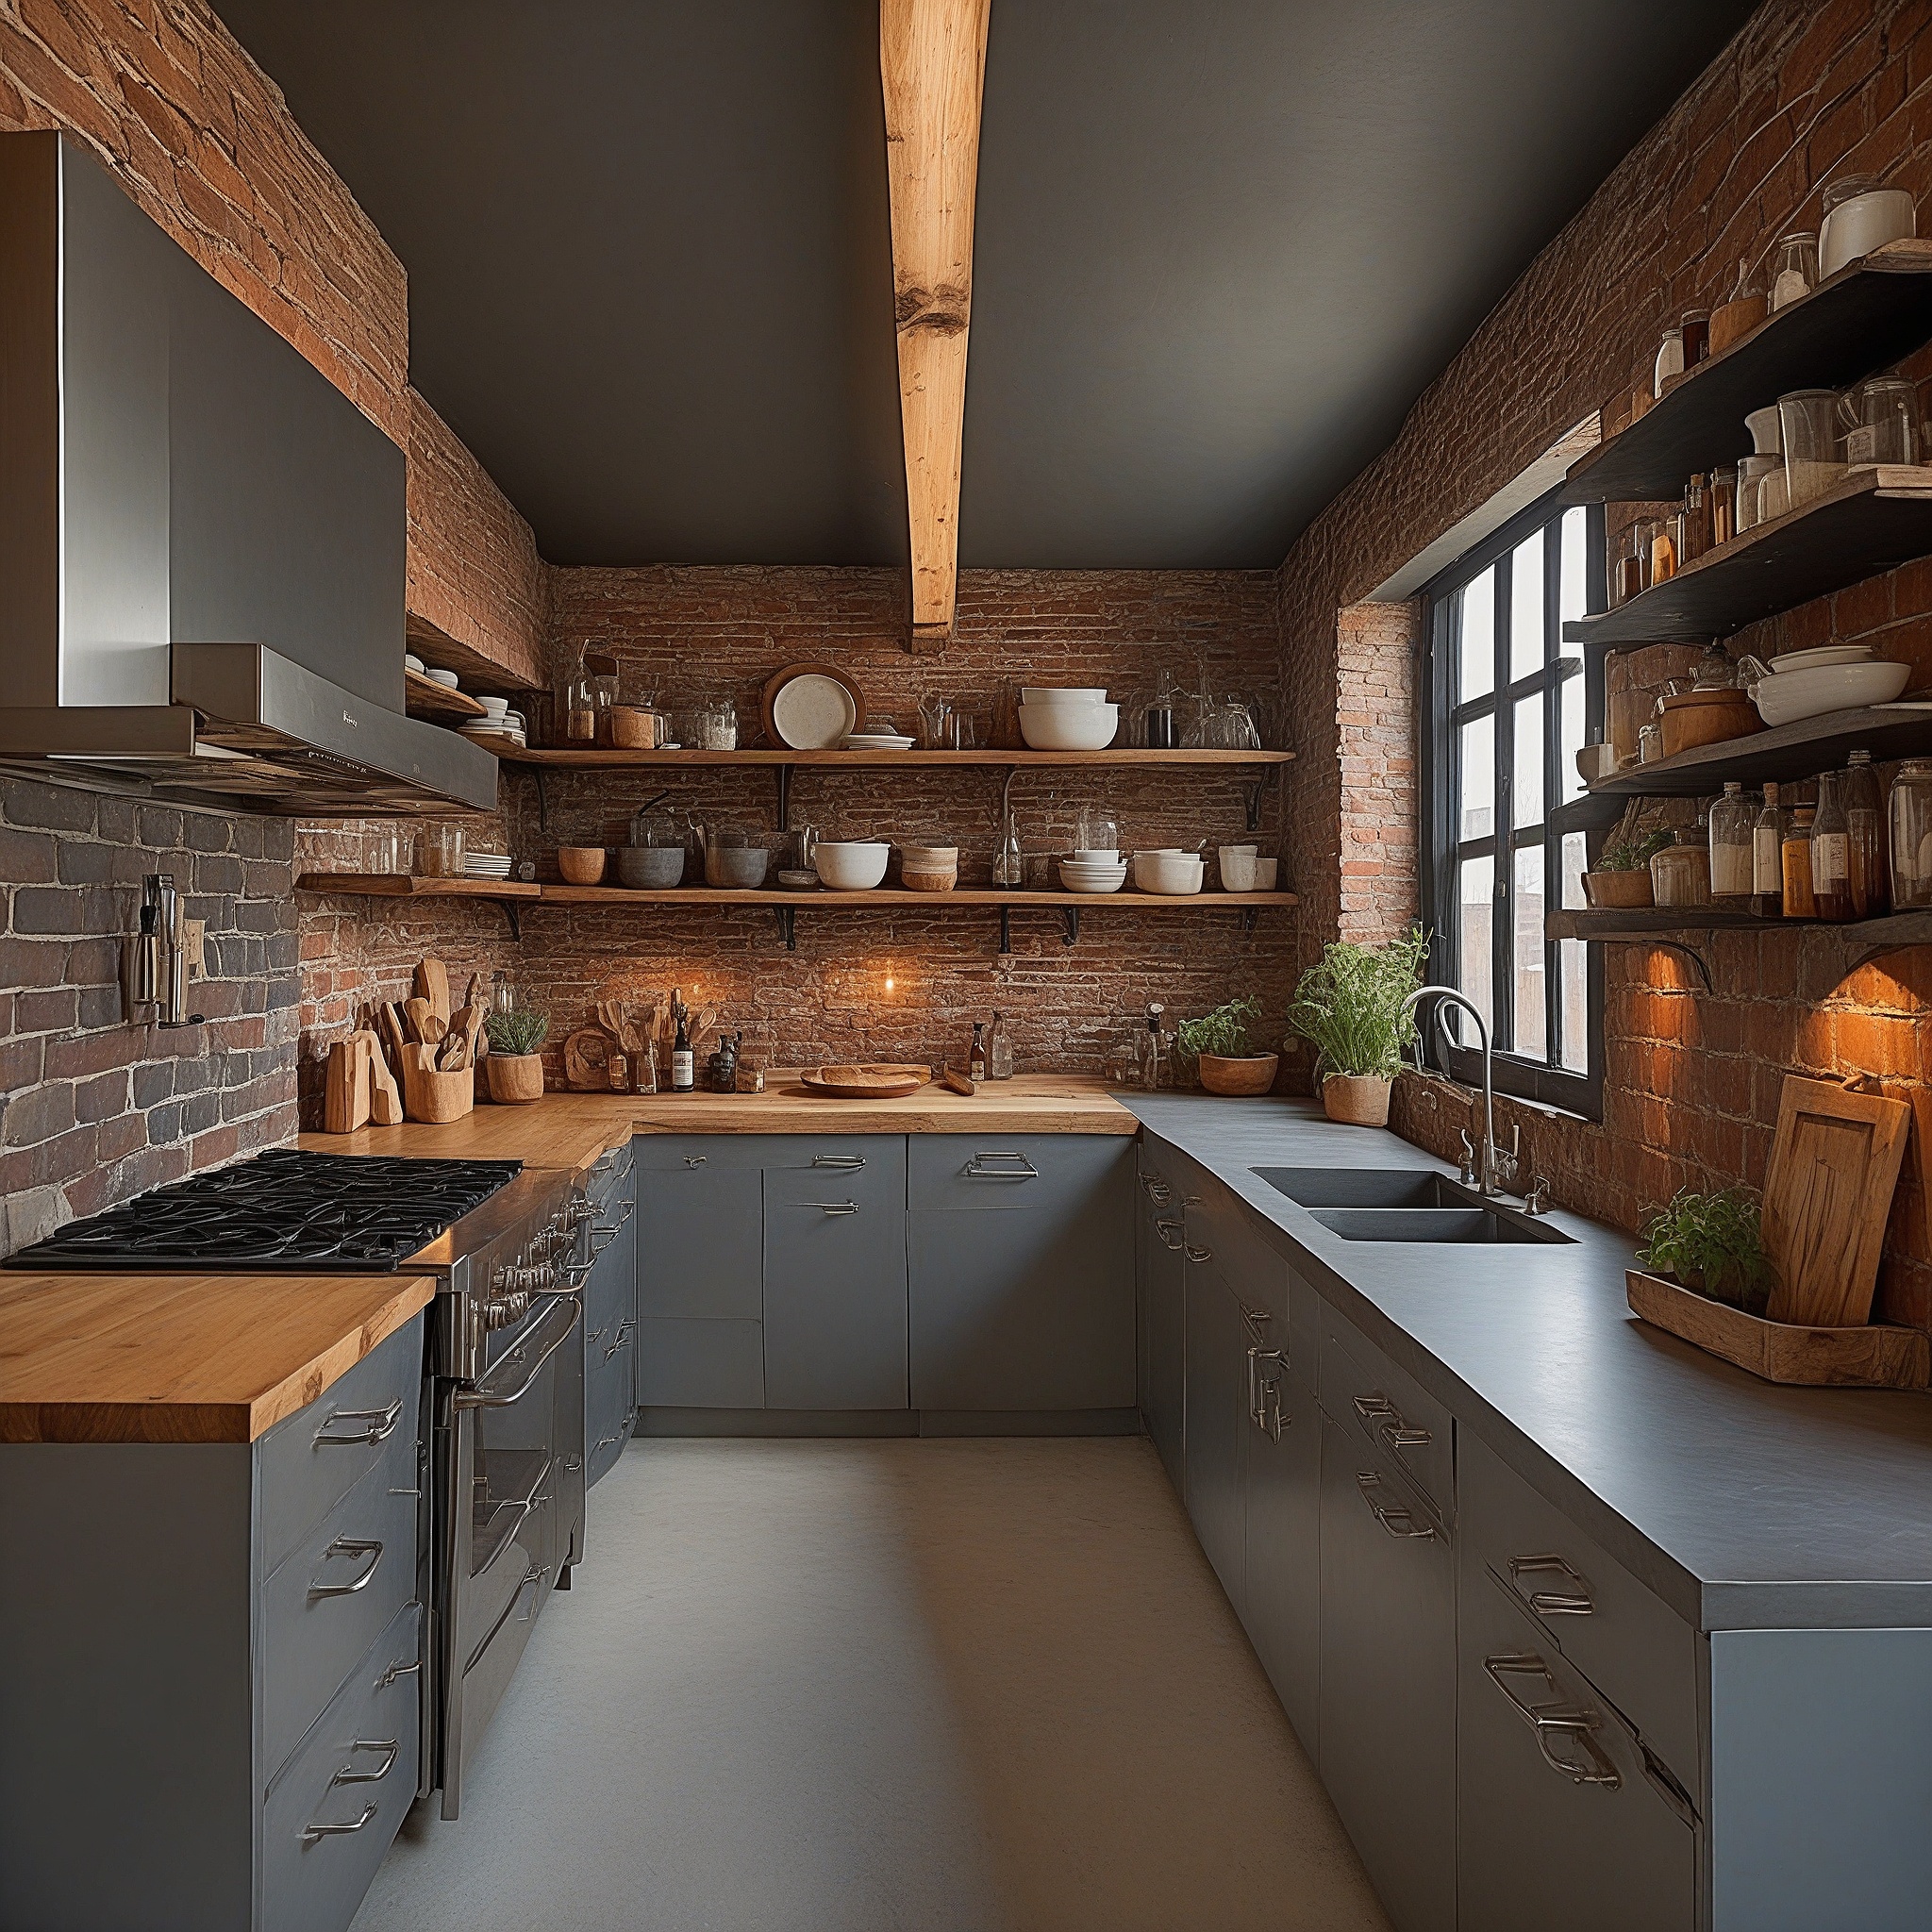 Industrial U-Shaped Kitchen With Exposed Brick Walls, Open Shelvin, Wooden Countertop And Stainless Steel Appliances